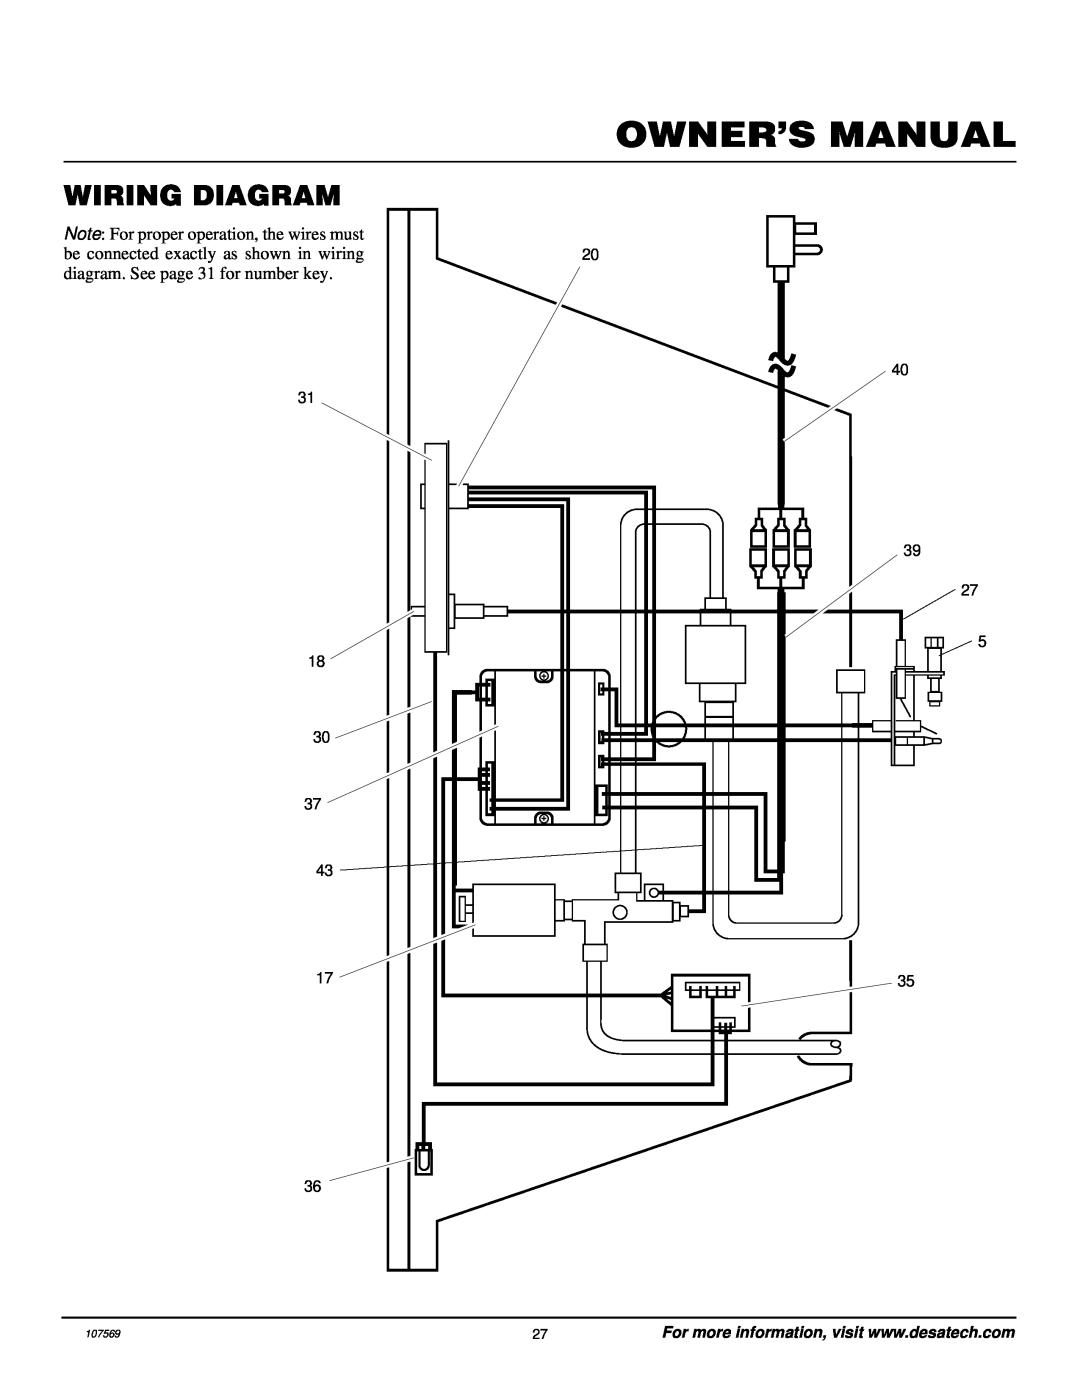 Desa CGEFP33NR installation manual Wiring Diagram, Note For proper operation, the wires must, 107569 